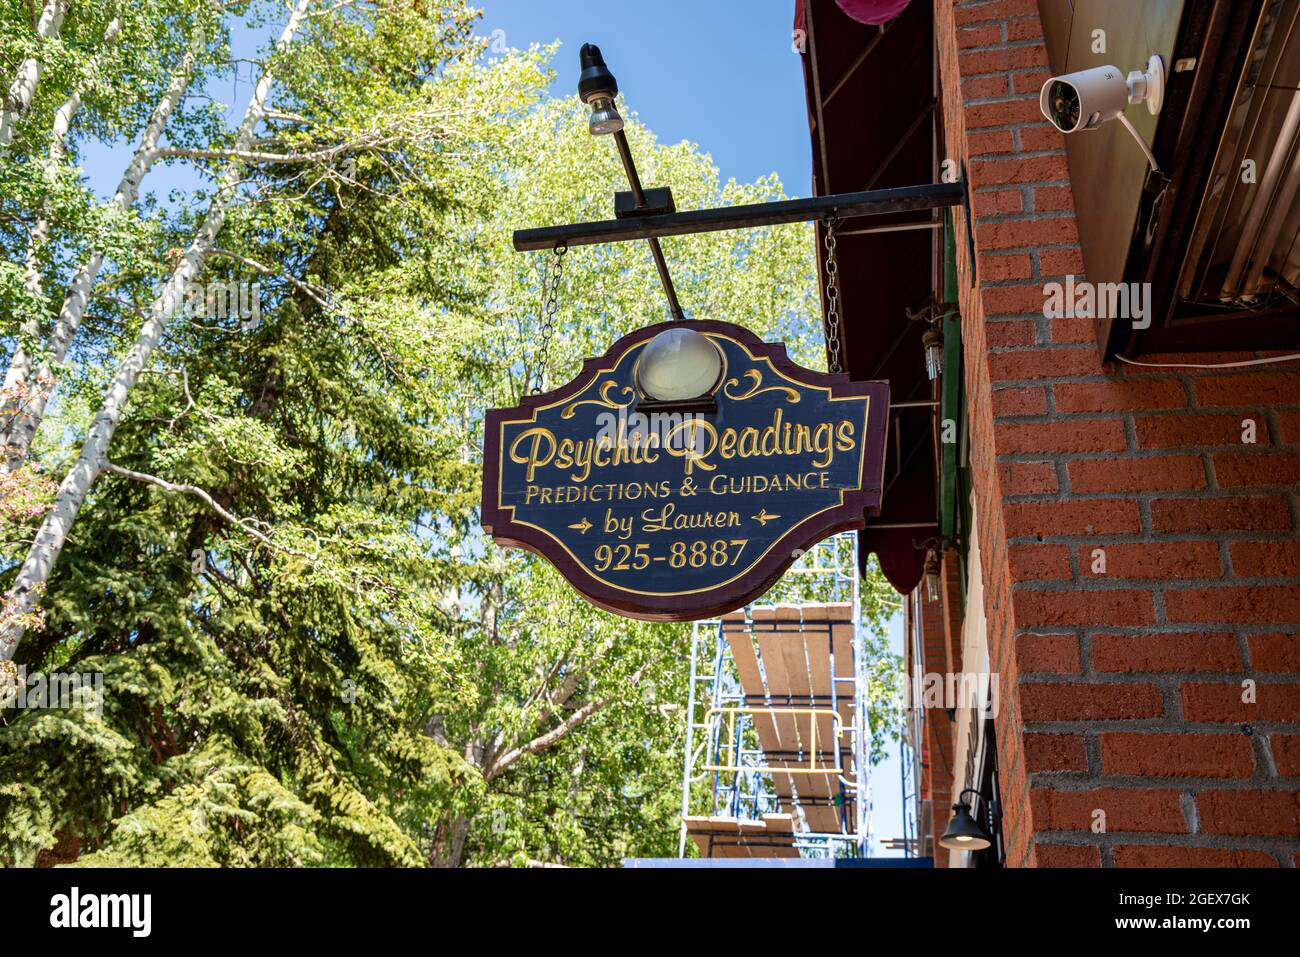 A sign for psychic readings, predictions and guidance by Lauren in downtown Aspen, Colorado. Stock Photo